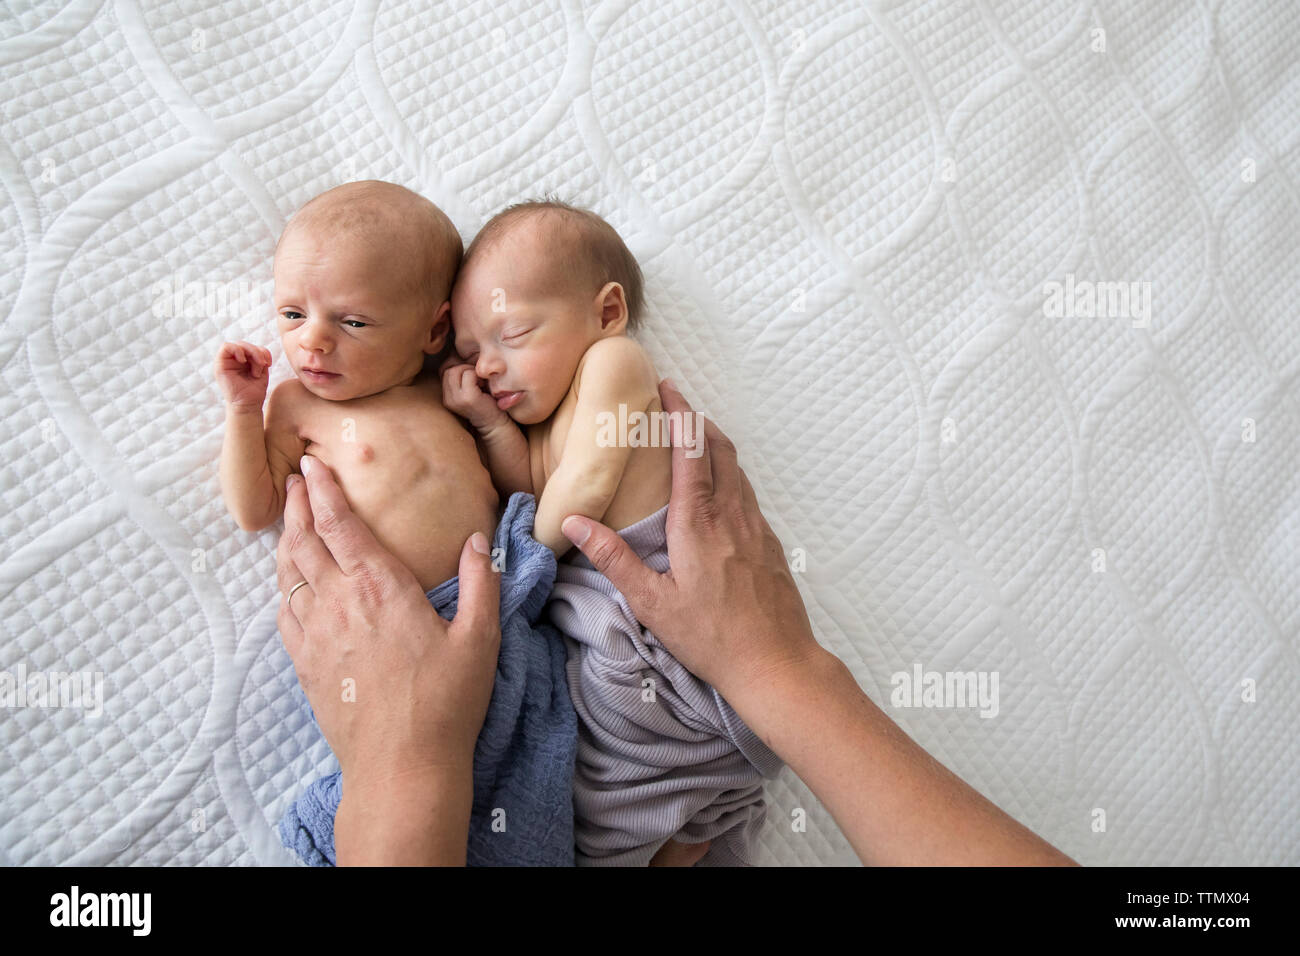 Twin Infant Photos · Crabapple Photography